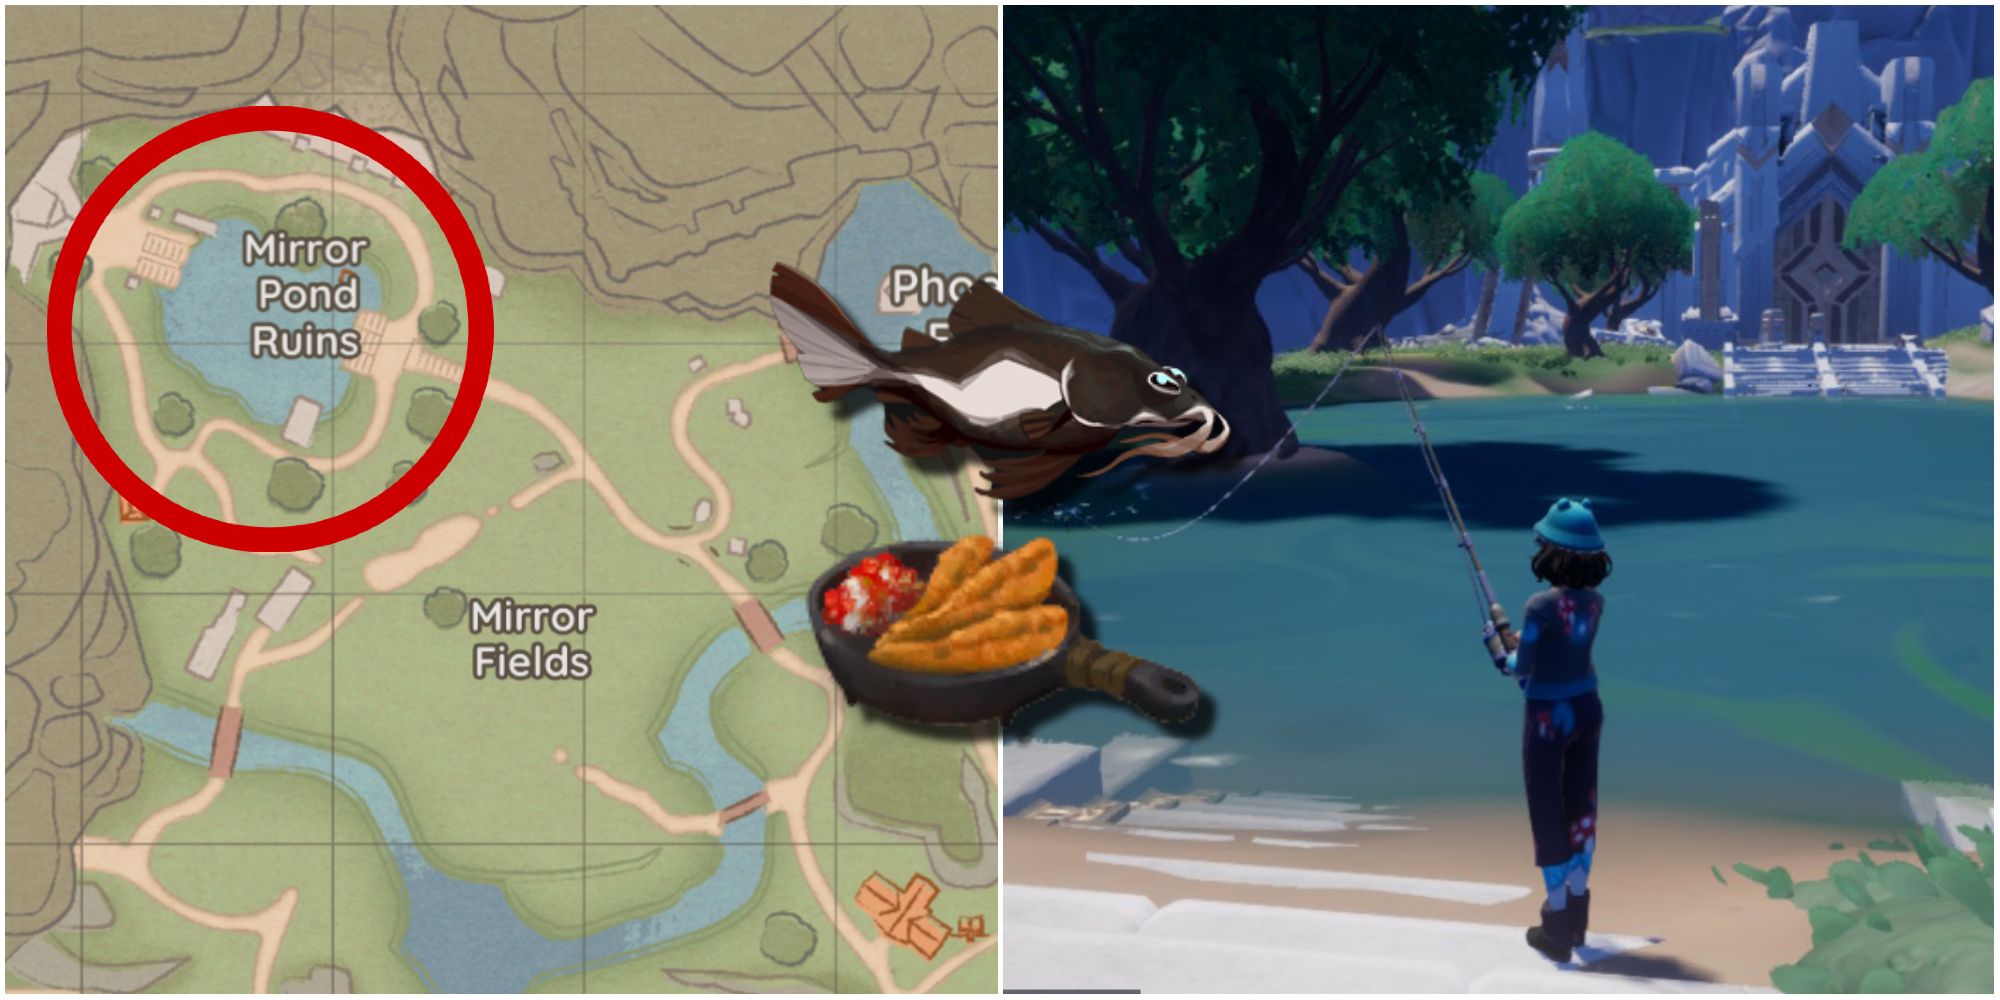 The map highlighting the Mirror Pond Ruins and a character fishing in the location